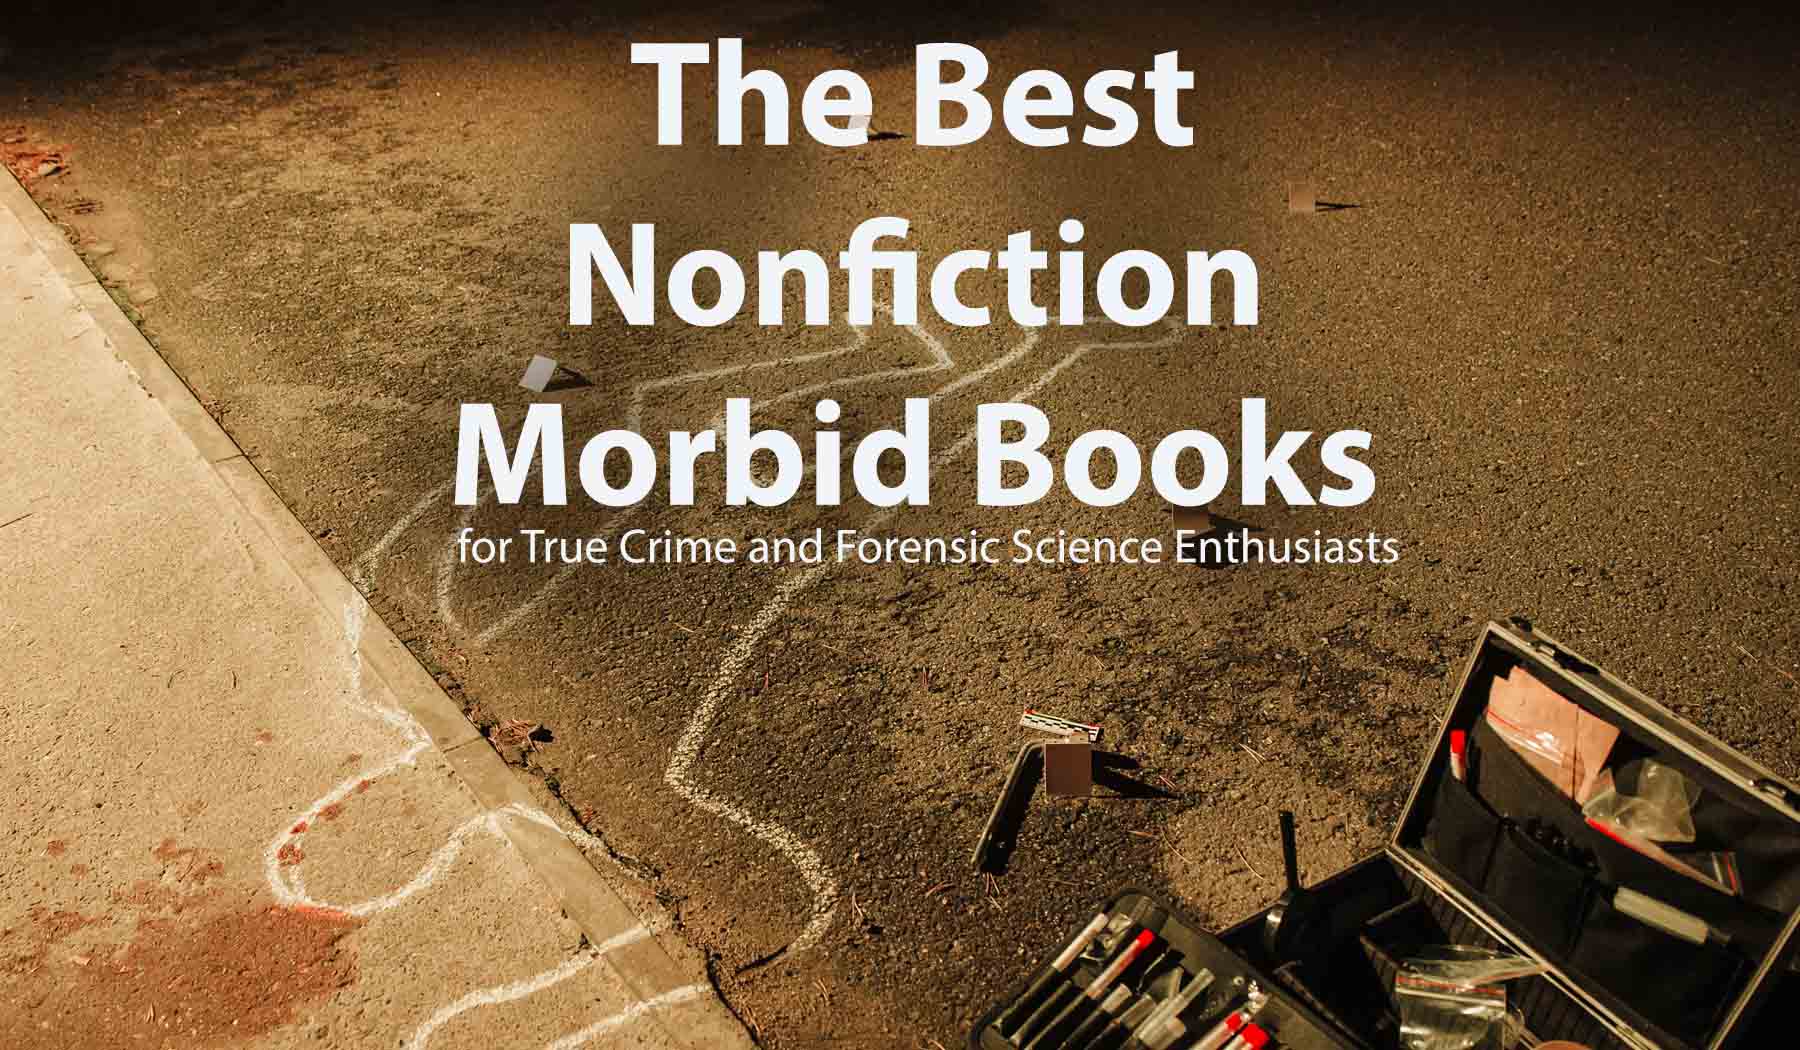 The Best Nonfiction Morbid Books for True Crime and Forensic Science Enthusiasts